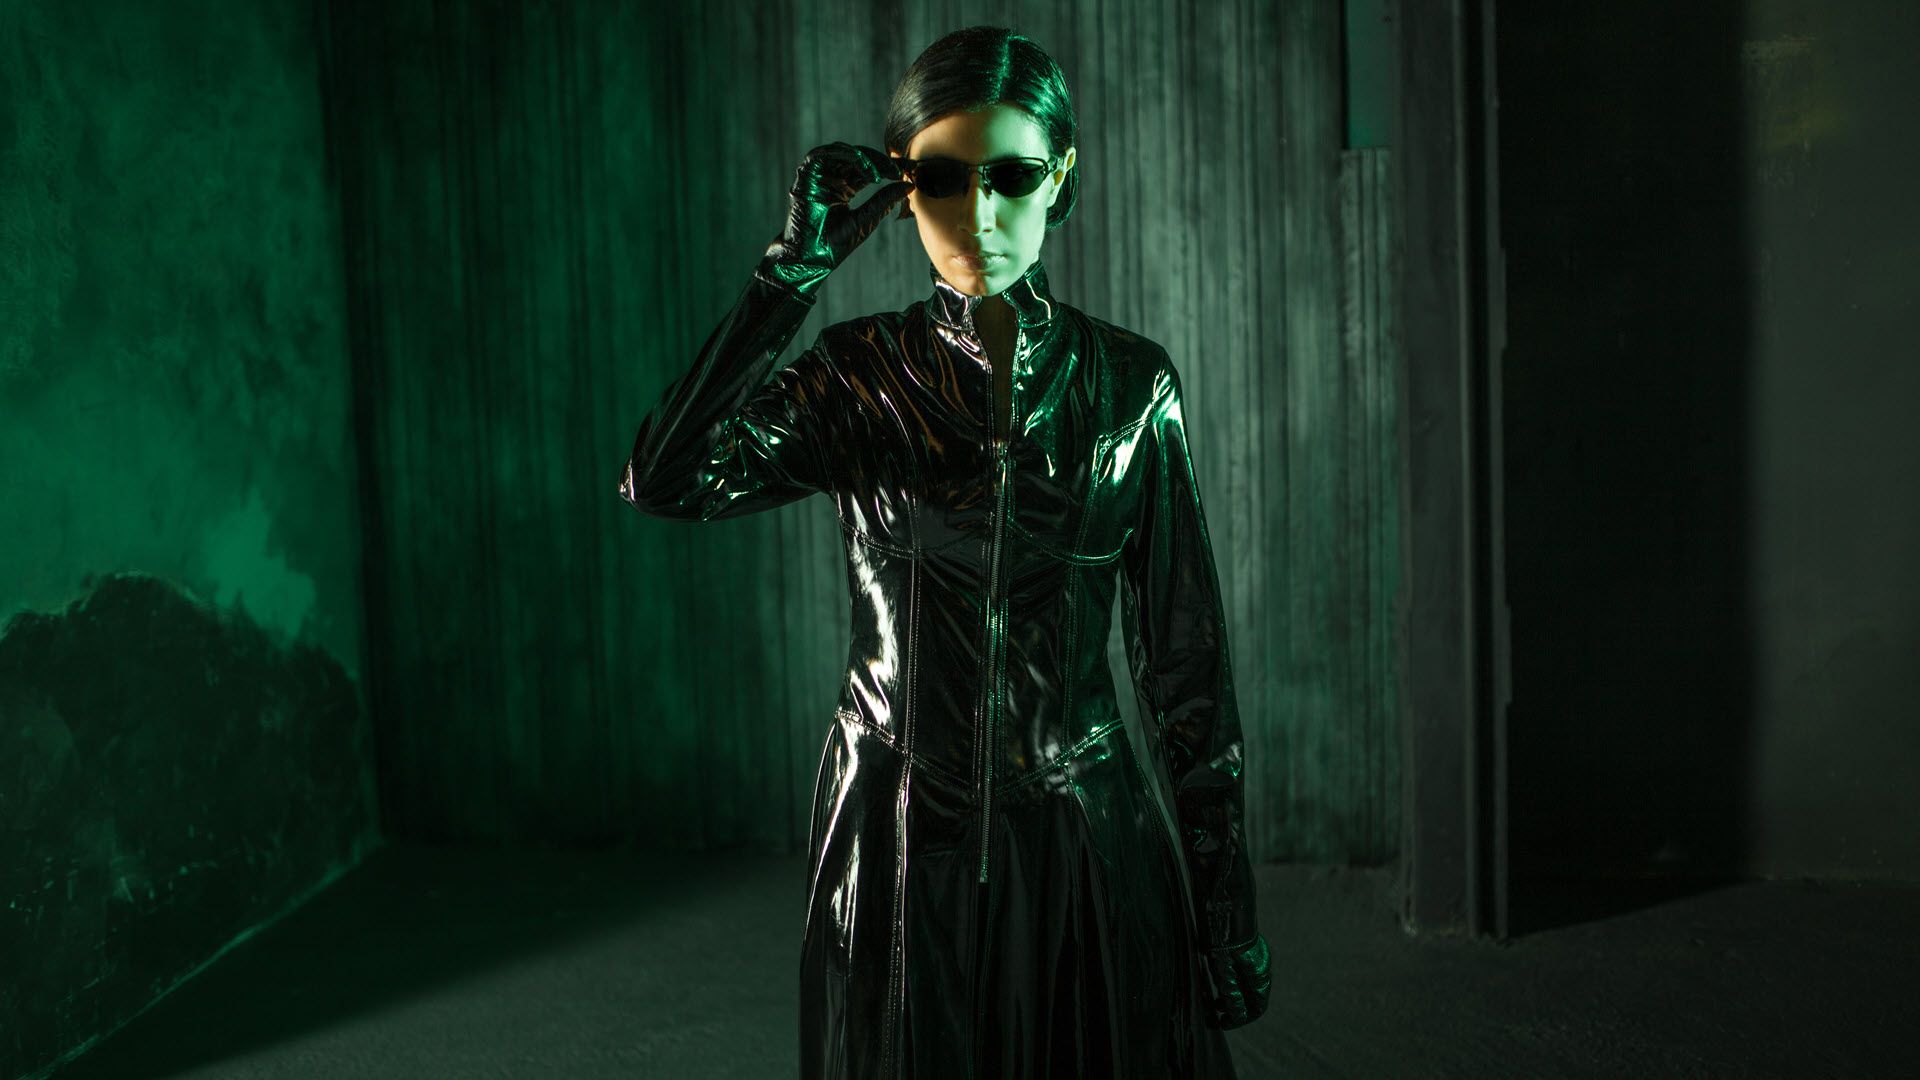 A young woman dressed like the character Trinity from 'The Matrix' surrounded by green hues.